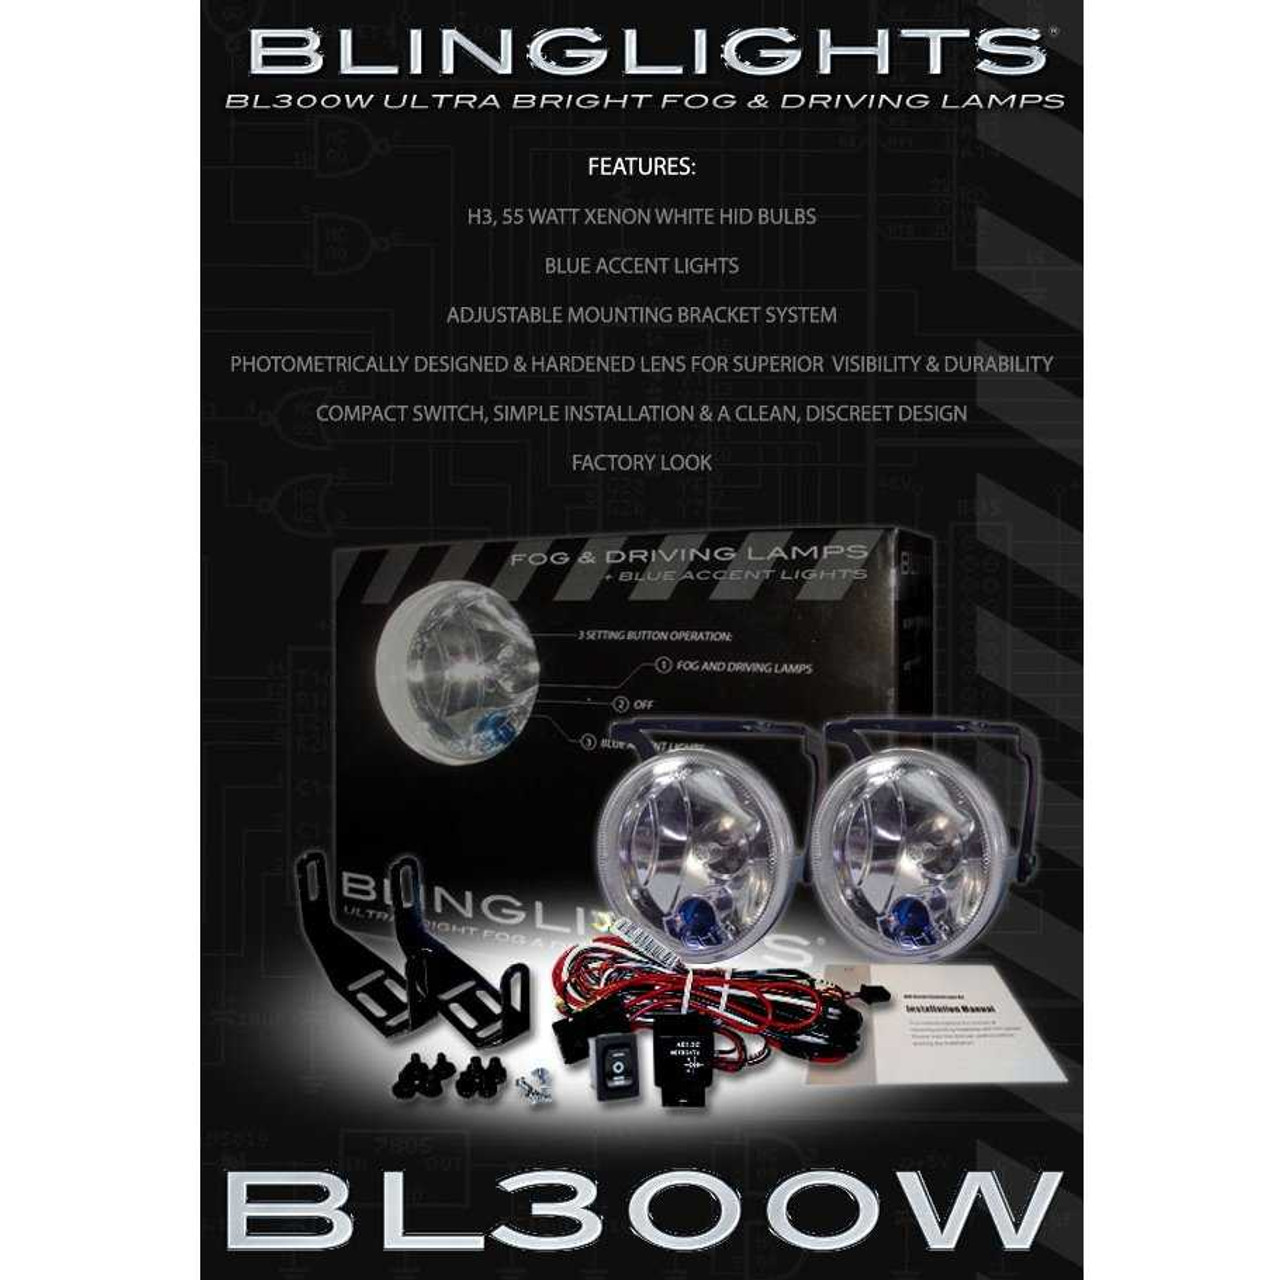 2006 2007 2008 2009 Range Rover Sport HSE Supercharged Xenon Fog Lamps Driving Lights Foglamps Kit